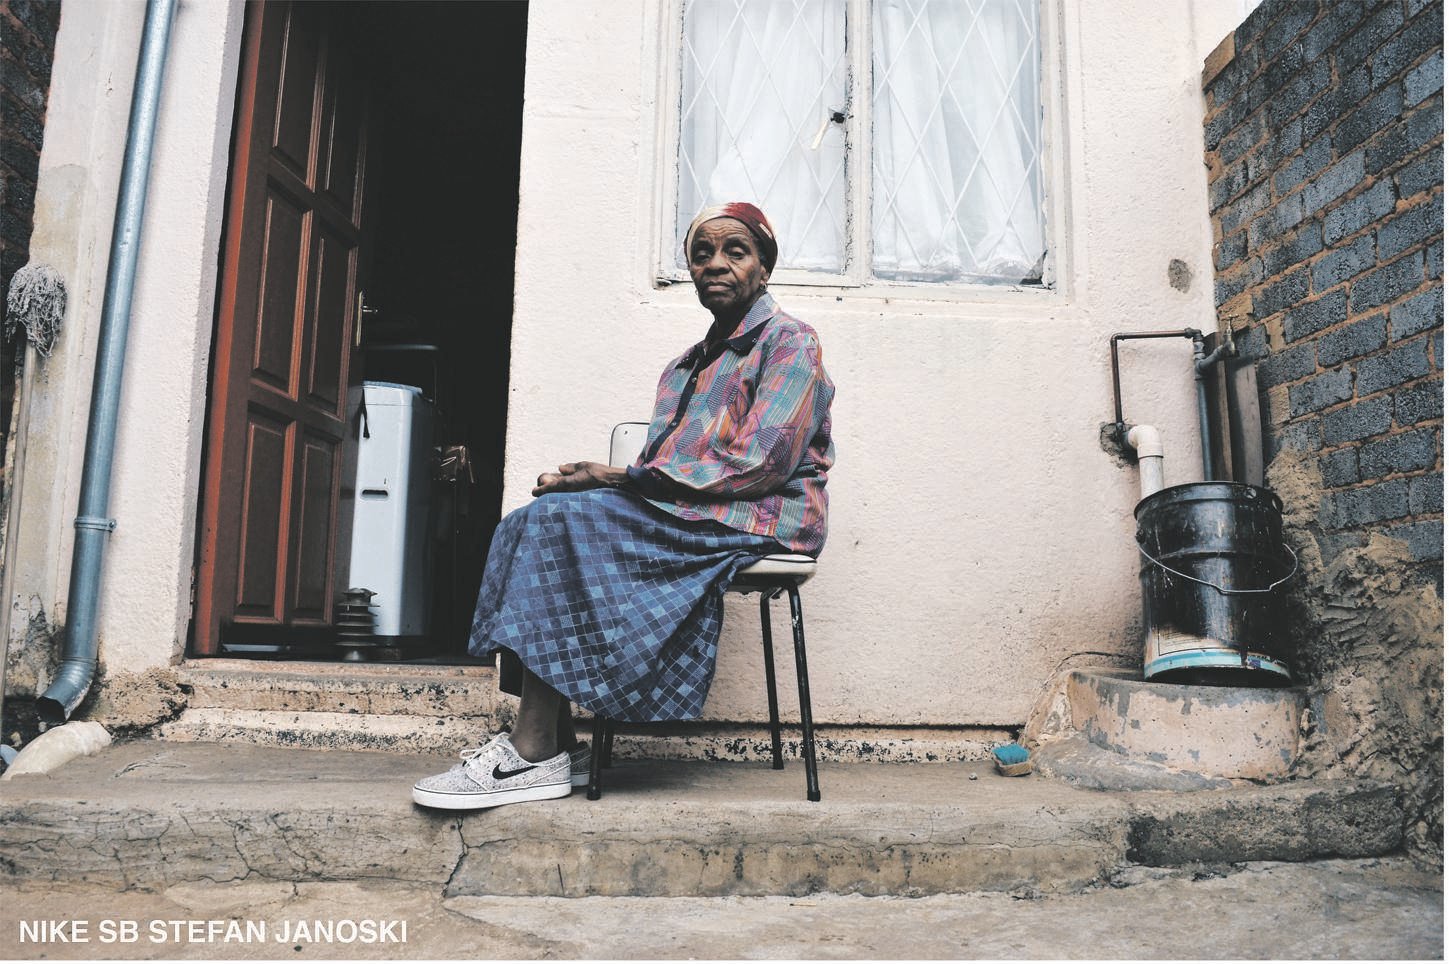 Irvin Khumalo’s series is particularly moving in how it connects the common thread of marginalisation and vulnerability that both the youth and the elderly face. Picture: Irvin Khumalo